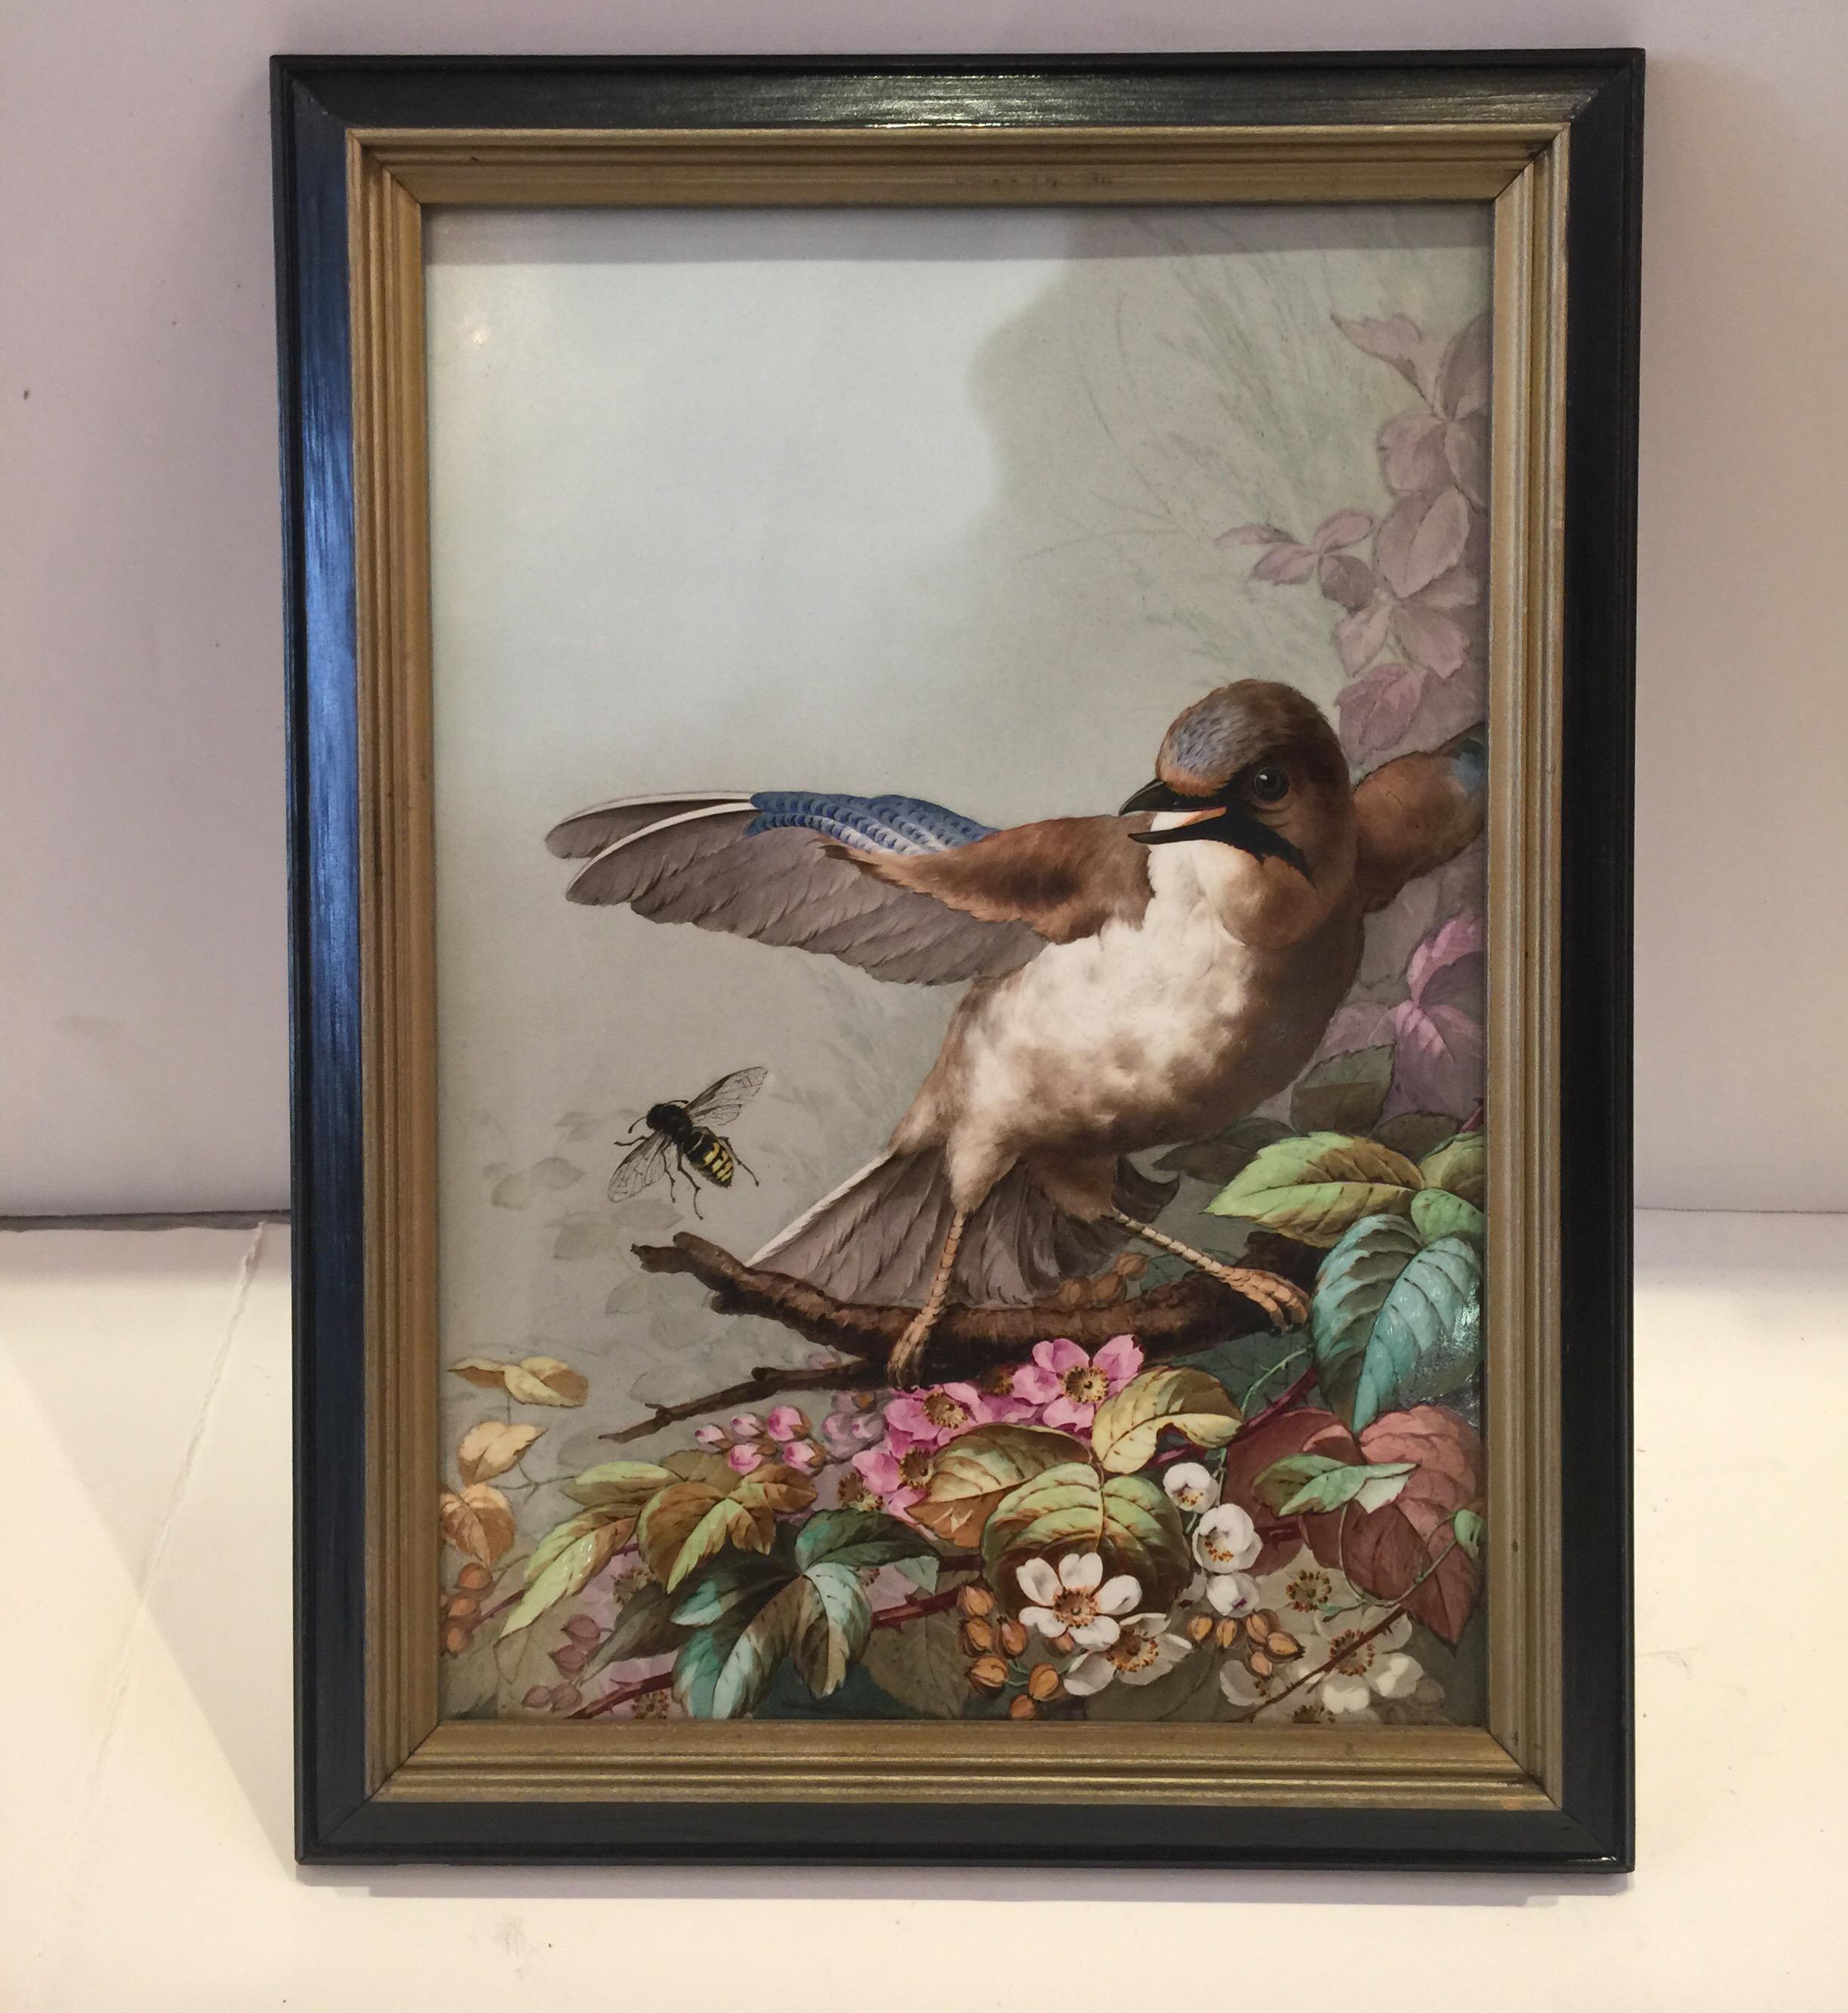 Charming Victorian hand painted porcelain tile of a bird and two bees and wildflowers, circa 1880-1890,
Very good detailed and painting technique, probably European.